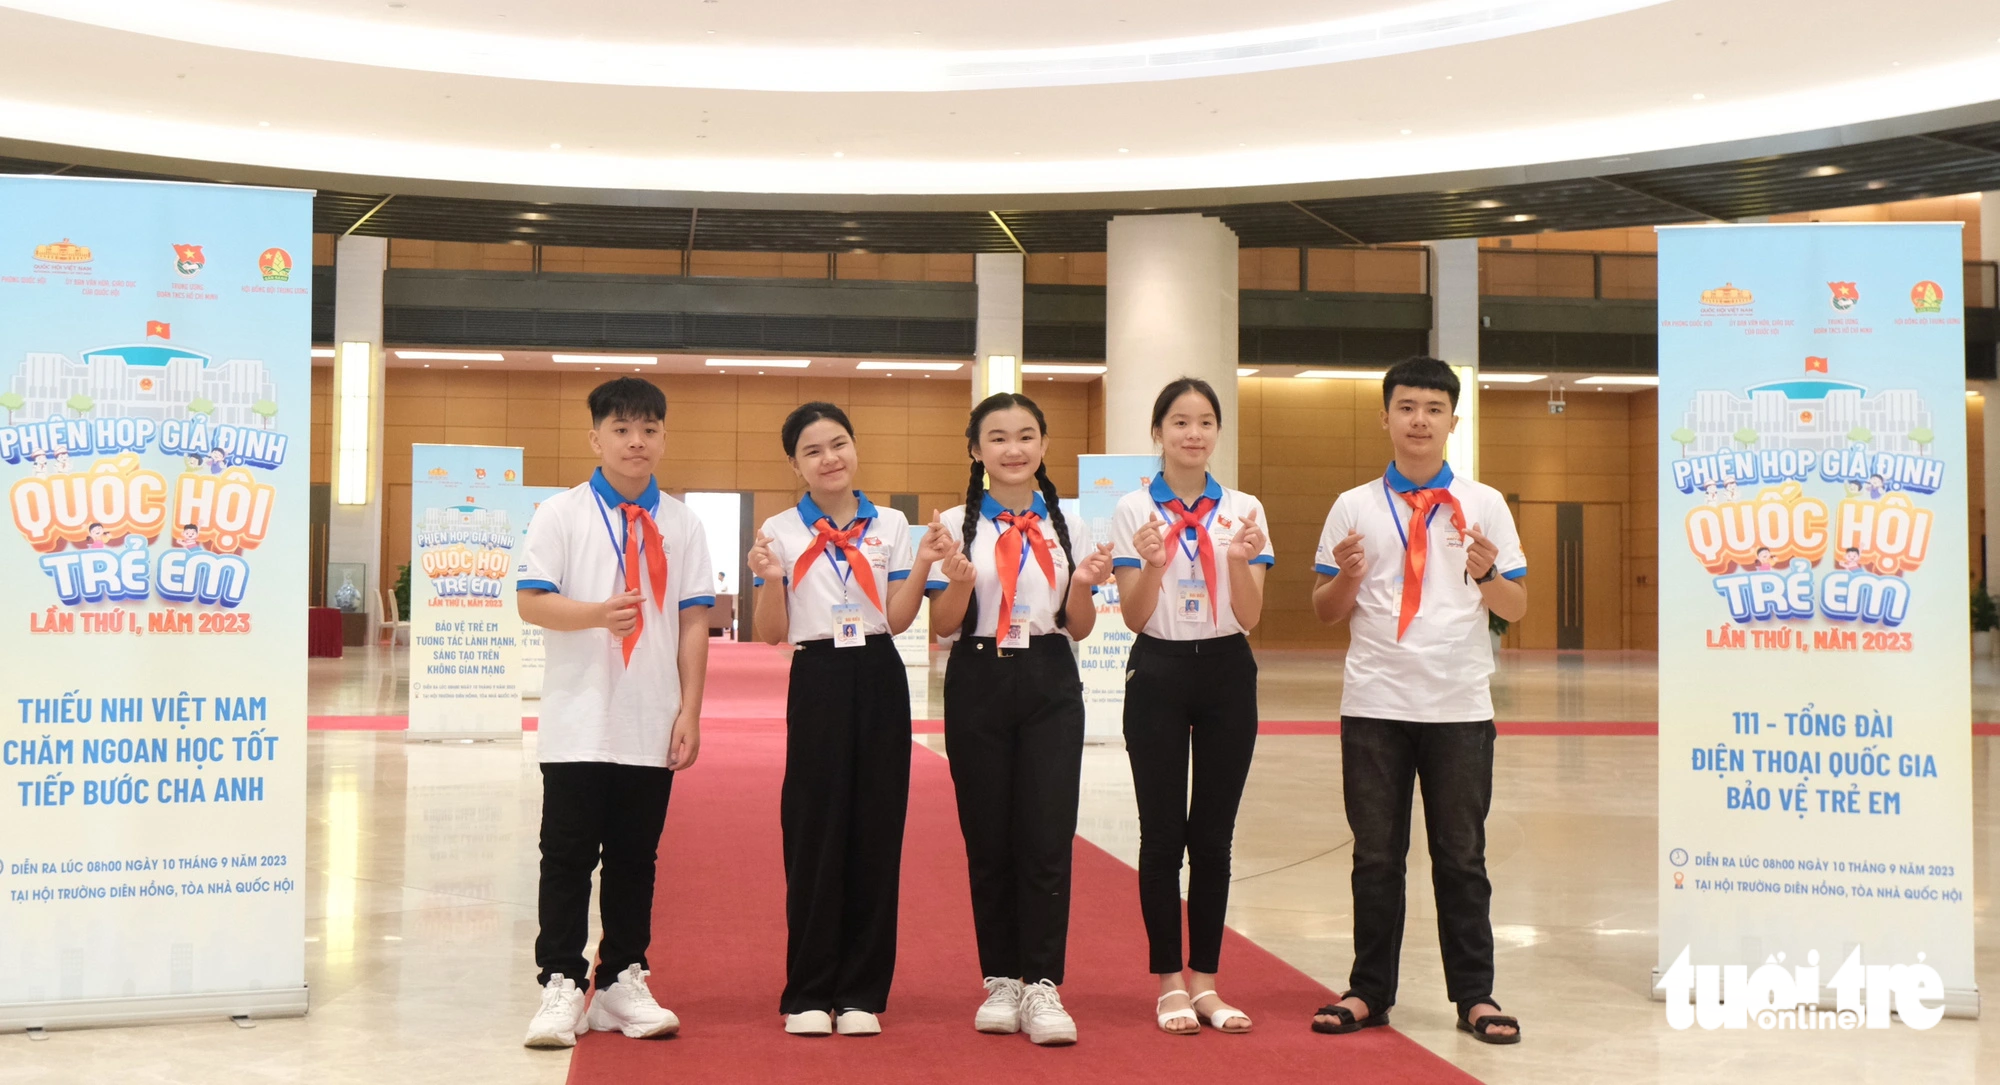 Children representatives from all over the country were able to visit the National Assembly building - Photo: HA THANH